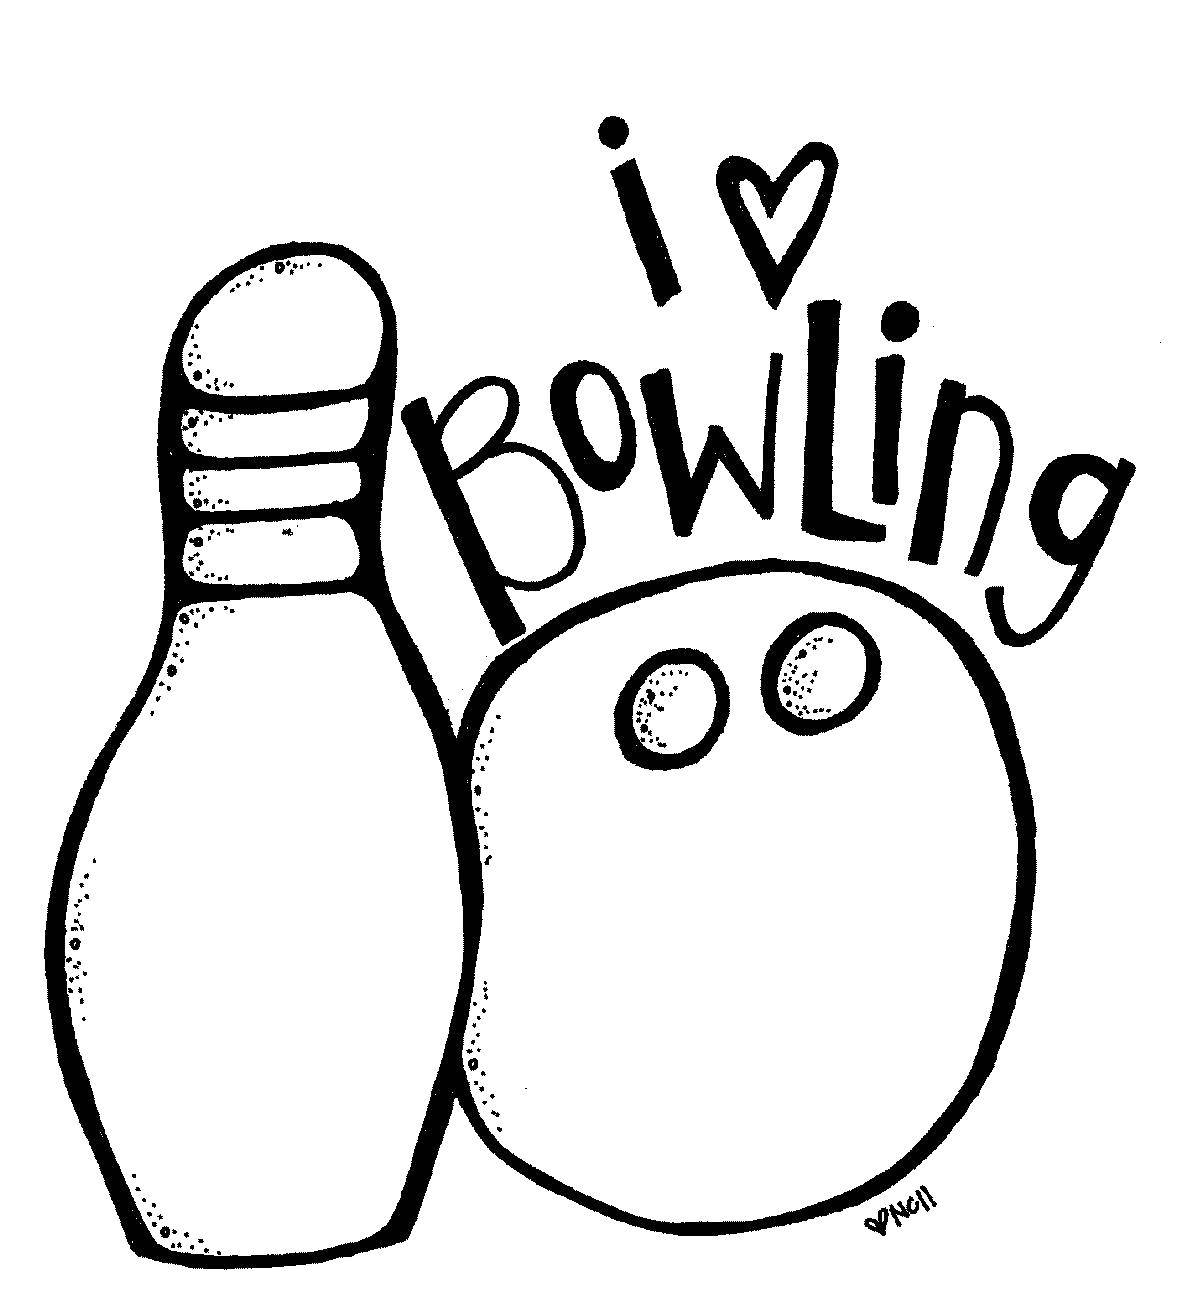 Coloring Bowling. Category Sports. Tags:  bowling, Sports.